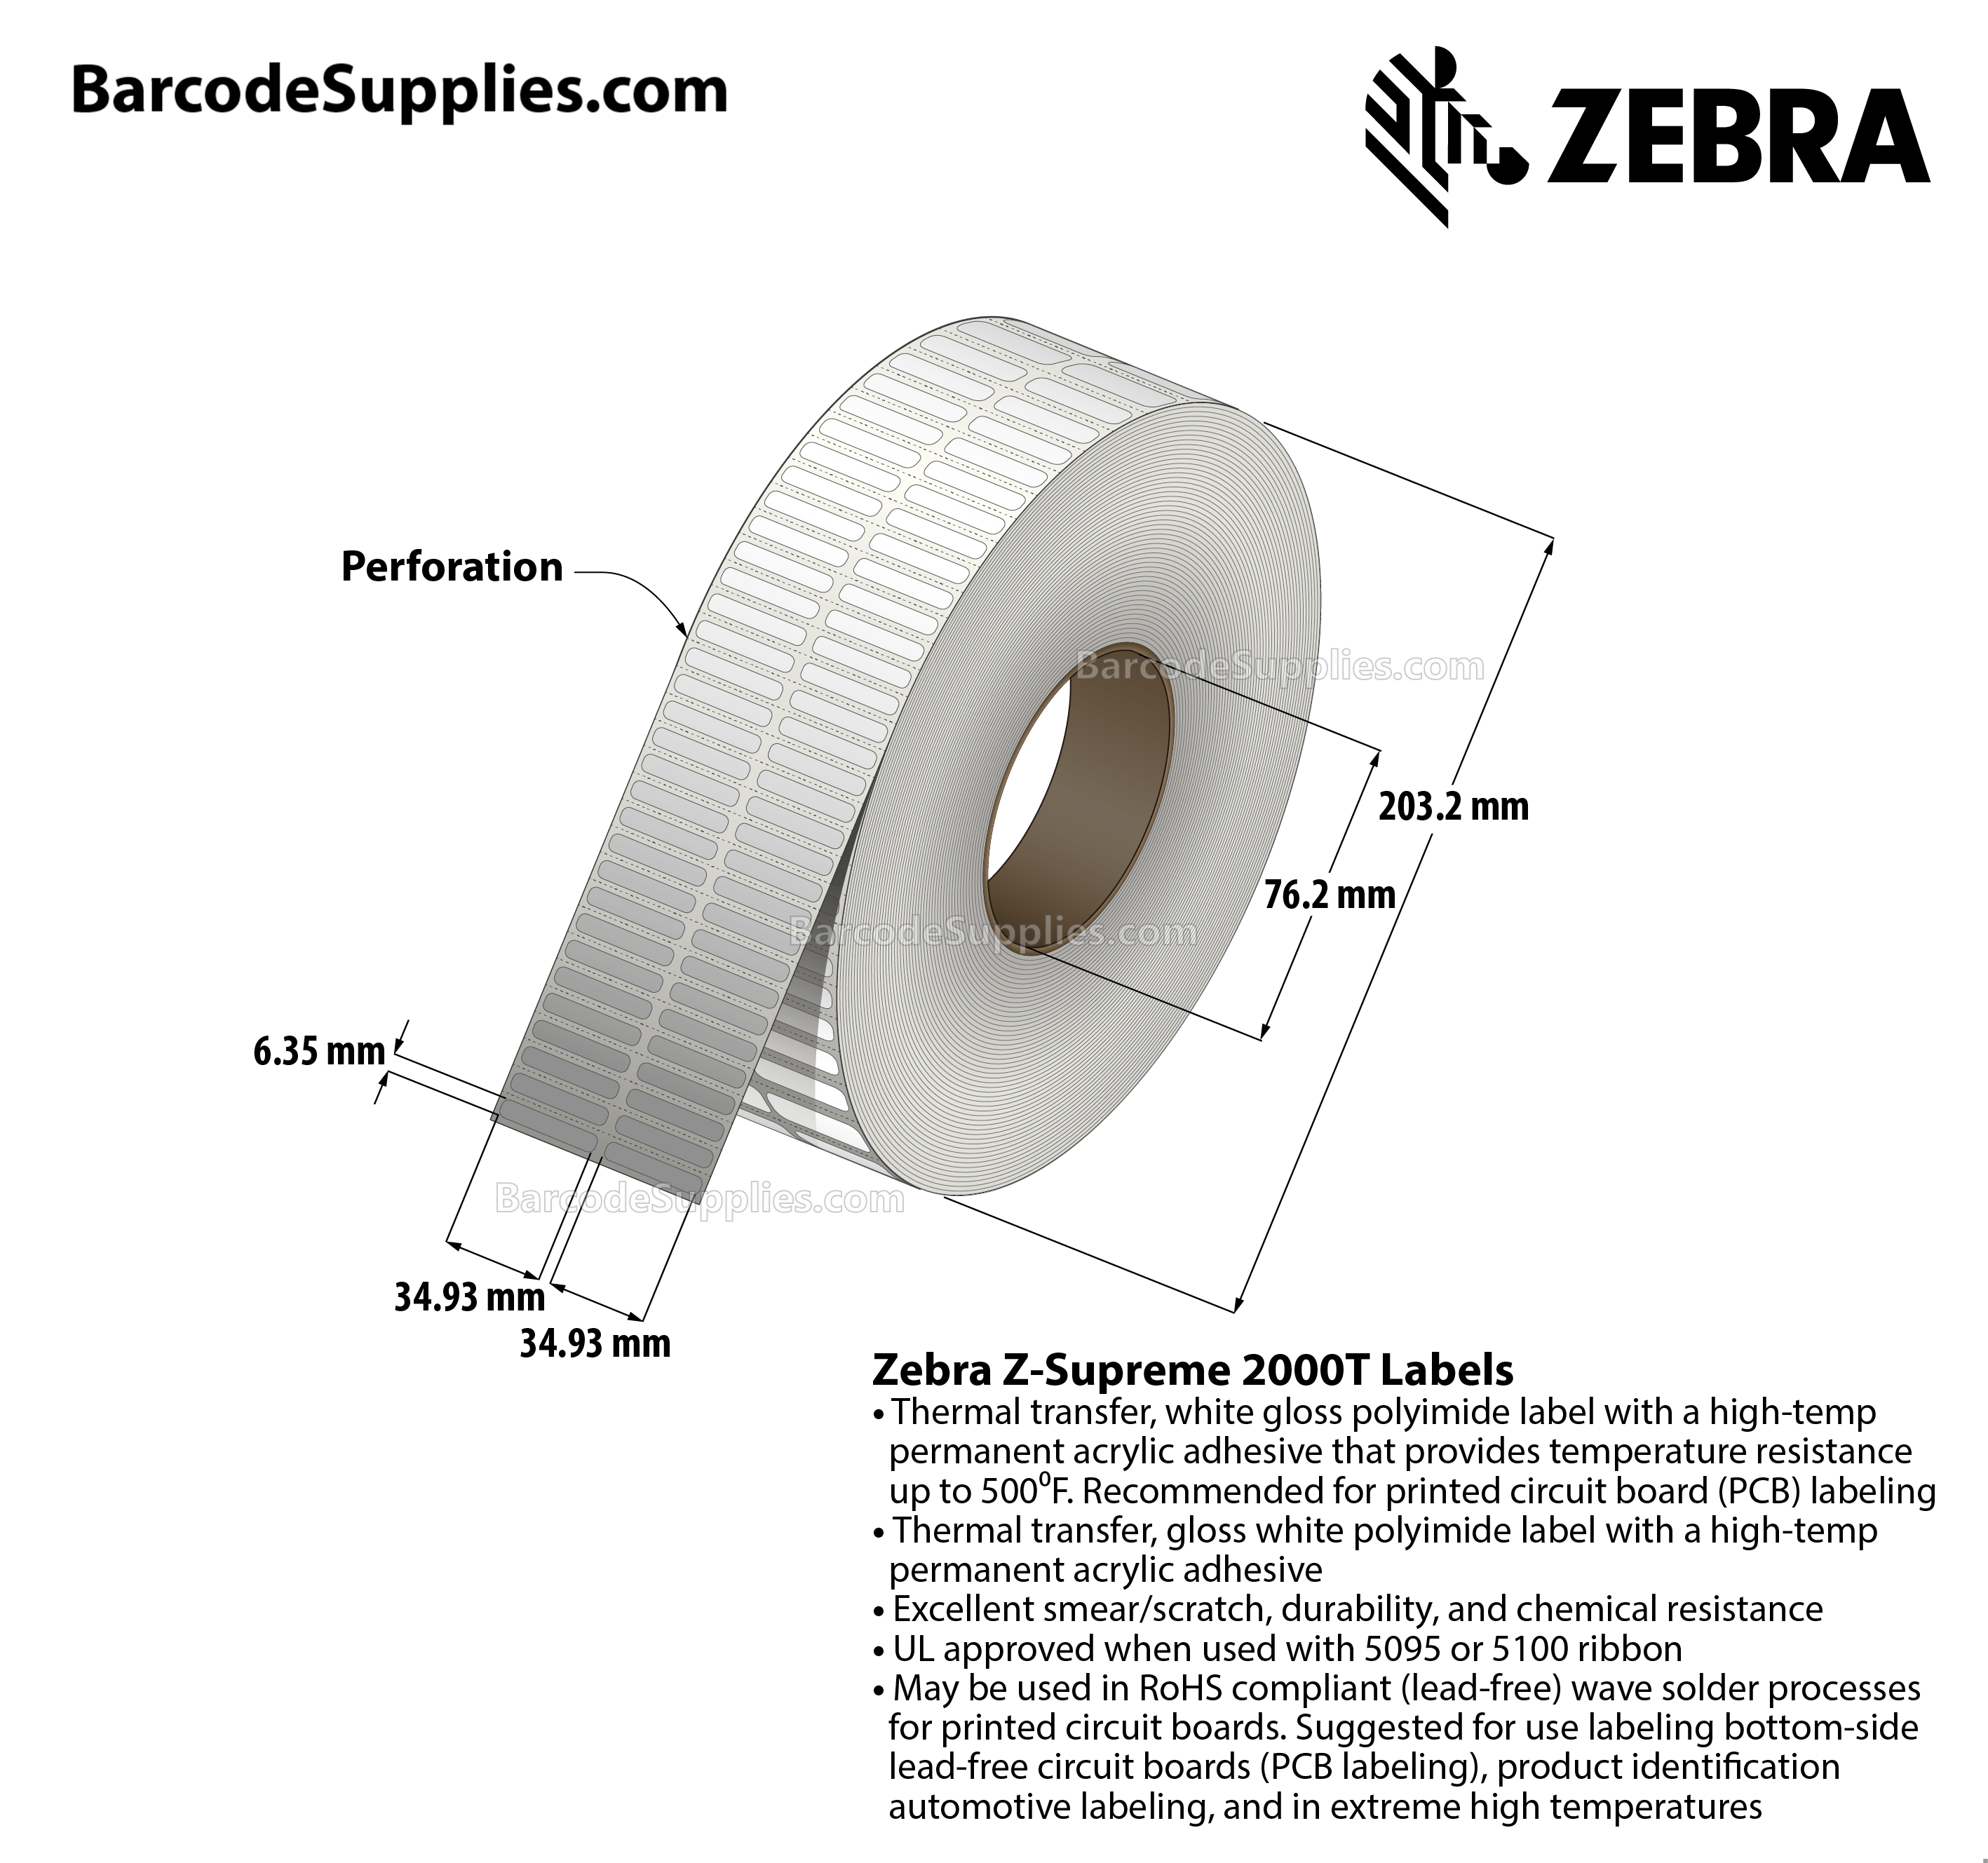 1.375 x 0.25 Thermal Transfer White Z-Supreme 2000T (2-Across) Labels With High-temp Adhesive - Perforated - 10000 Labels Per Roll - Carton Of 1 Rolls - 10000 Labels Total - MPN: 10023208